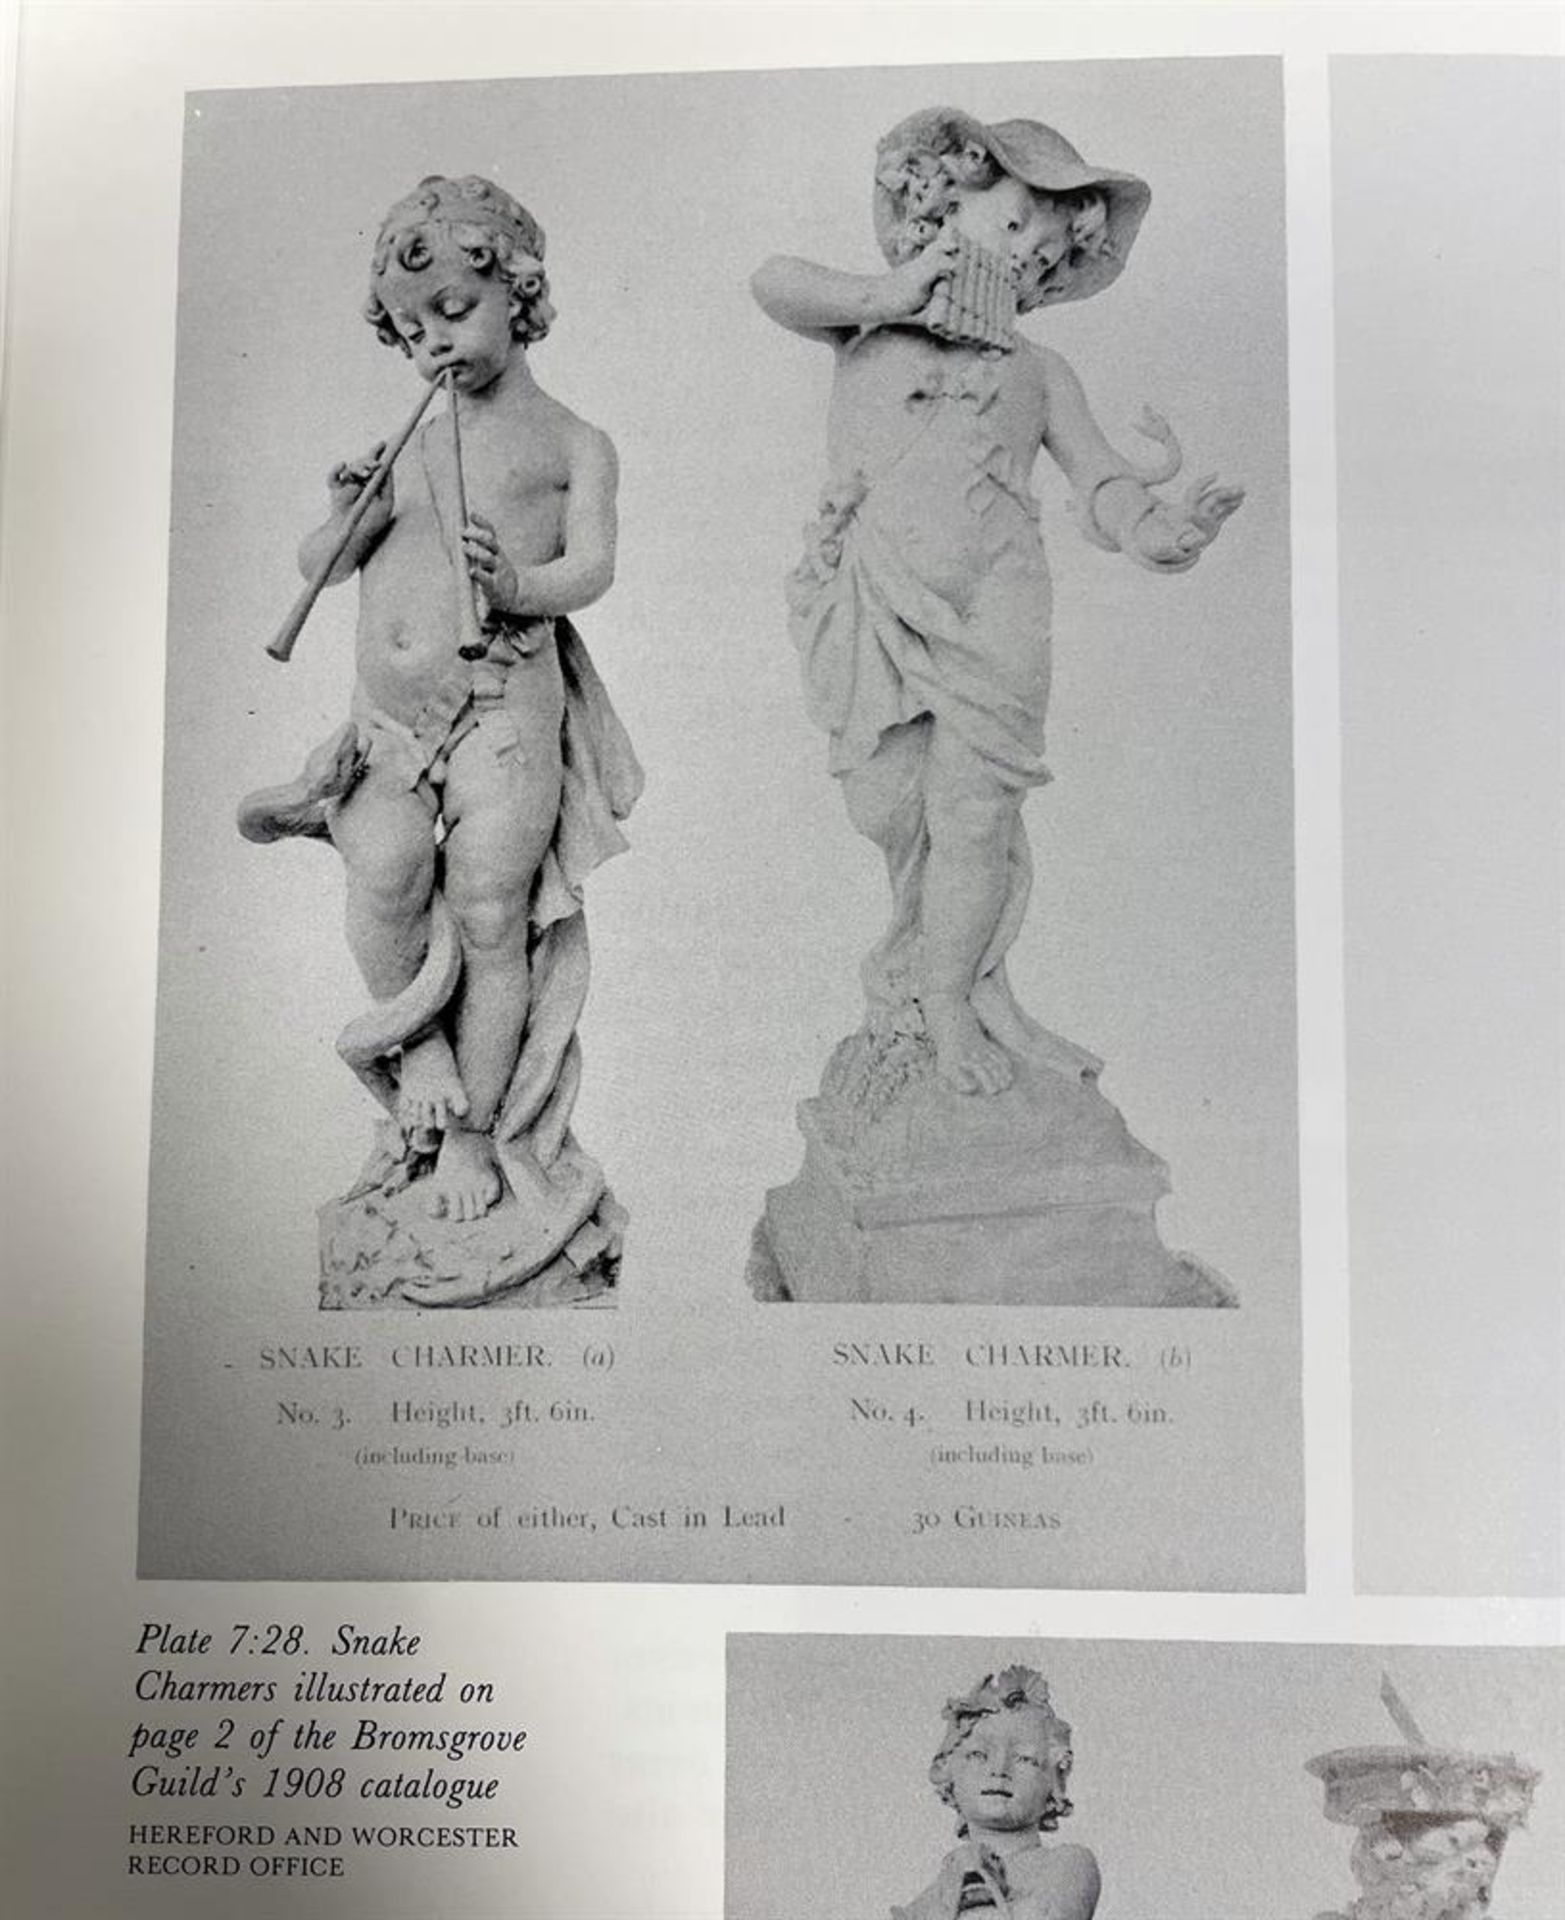 WALTER GILBERT FOR THE BROMSGROVE GUILD- A RARE LEAD FIGURE 'THE SNAKE CHARMER', CIRCA 1908 - Image 6 of 6